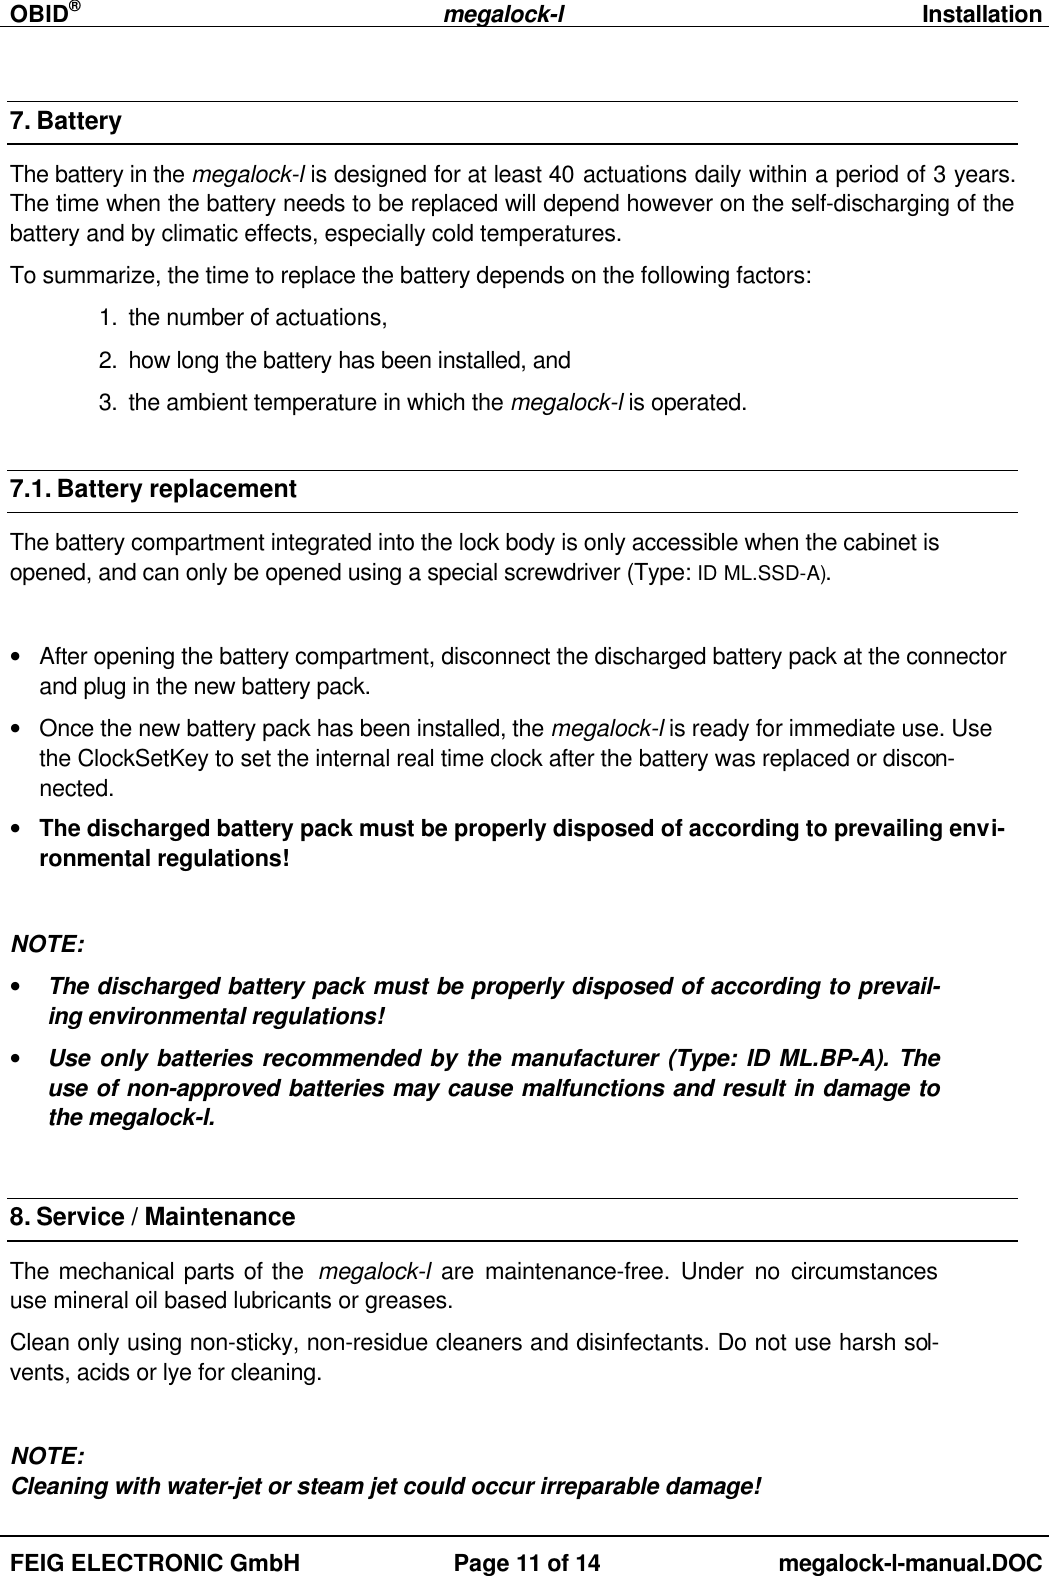 OBID®megalock-lInstallationFEIG ELECTRONIC GmbH Page 11 of 14 megalock-l-manual.DOC7. BatteryThe battery in the megalock-l is designed for at least 40 actuations daily within a period of 3 years.The time when the battery needs to be replaced will depend however on the self-discharging of thebattery and by climatic effects, especially cold temperatures.To summarize, the time to replace the battery depends on the following factors:1. the number of actuations,2. how long the battery has been installed, and3. the ambient temperature in which the megalock-l is operated.7.1. Battery replacementThe battery compartment integrated into the lock body is only accessible when the cabinet isopened, and can only be opened using a special screwdriver (Type: ID ML.SSD-A).• After opening the battery compartment, disconnect the discharged battery pack at the connectorand plug in the new battery pack.• Once the new battery pack has been installed, the megalock-l is ready for immediate use. Usethe ClockSetKey to set the internal real time clock after the battery was replaced or discon-nected.• The discharged battery pack must be properly disposed of according to prevailing envi-ronmental regulations!NOTE:• The discharged battery pack must be properly disposed of according to prevail-ing environmental regulations!• Use only batteries recommended by the manufacturer (Type: ID ML.BP-A). Theuse of non-approved batteries may cause malfunctions and result in damage tothe megalock-l.8. Service / MaintenanceThe mechanical parts of the  megalock-l are maintenance-free. Under no circumstancesuse mineral oil based lubricants or greases.Clean only using non-sticky, non-residue cleaners and disinfectants. Do not use harsh sol-vents, acids or lye for cleaning.NOTE:Cleaning with water-jet or steam jet could occur irreparable damage!